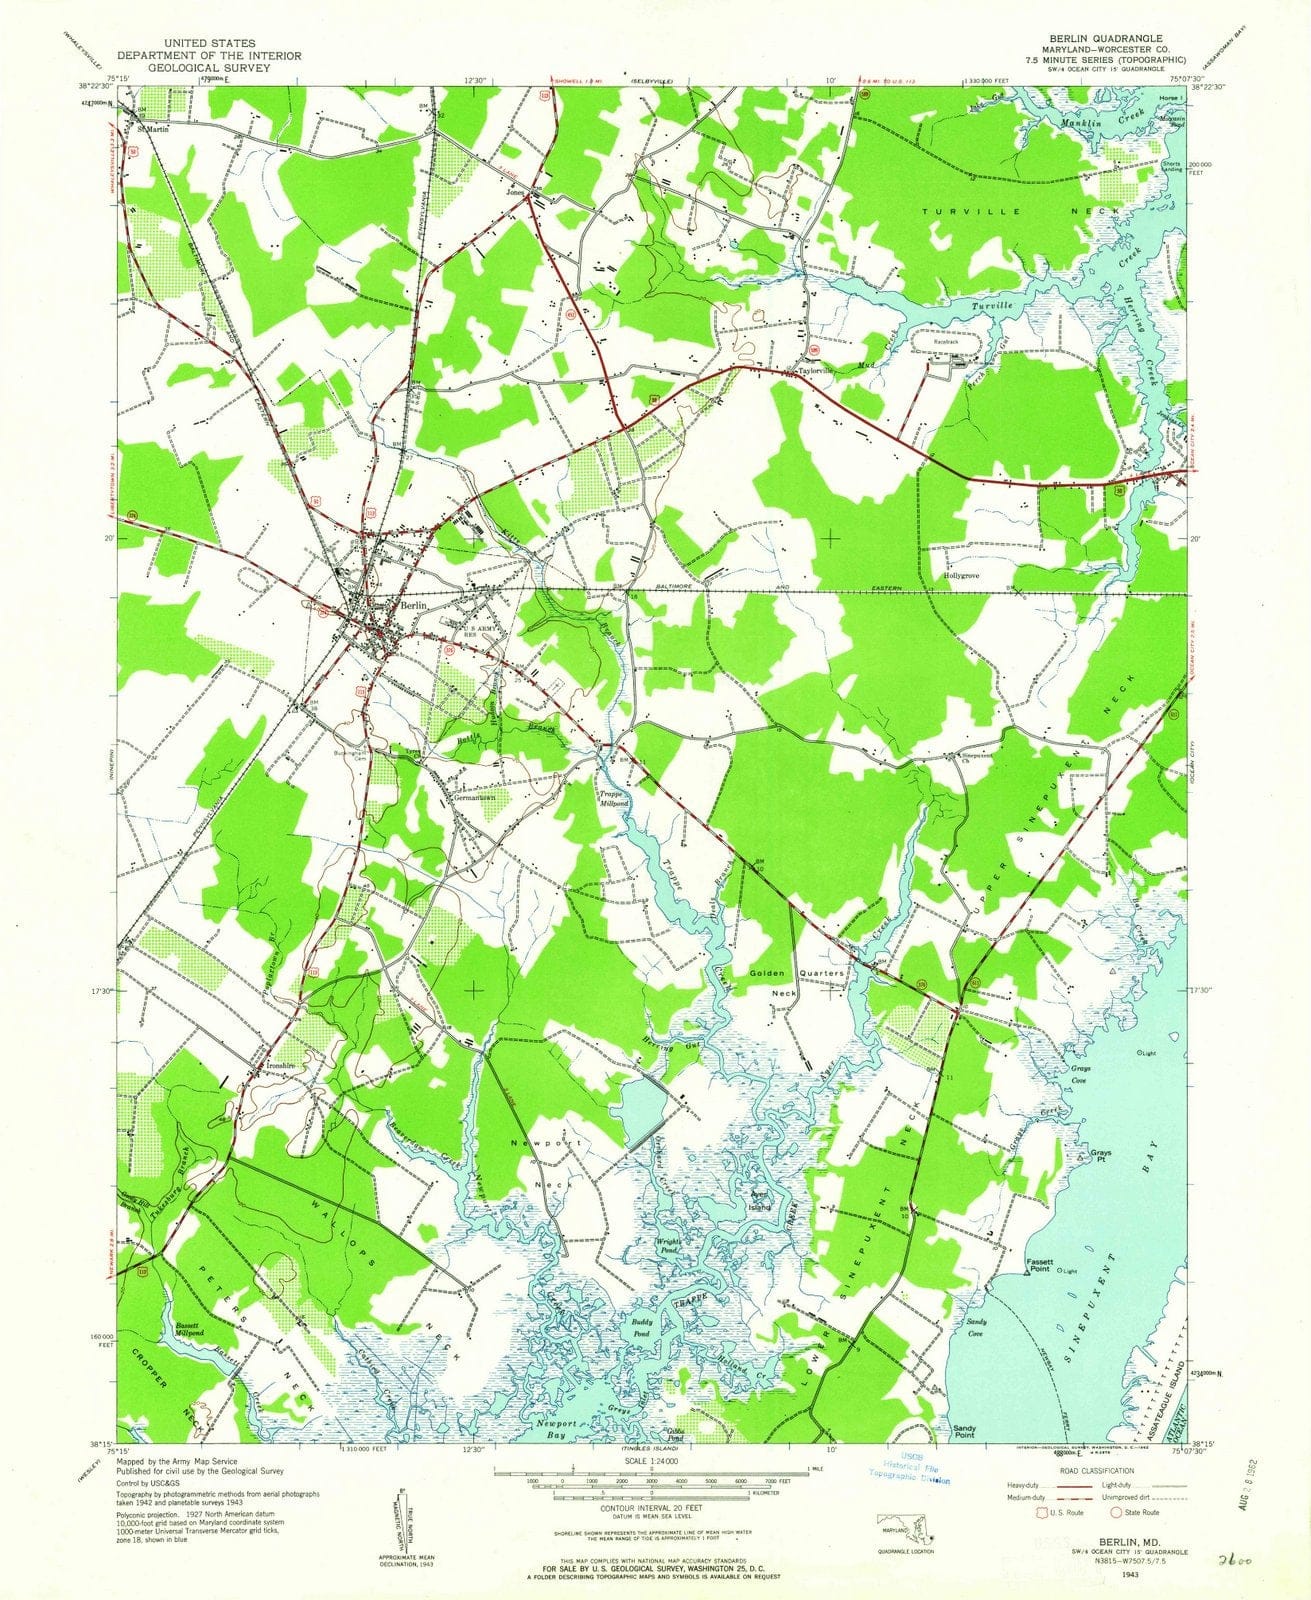 1943 Berlin, MD - Maryland - USGS Topographic Map